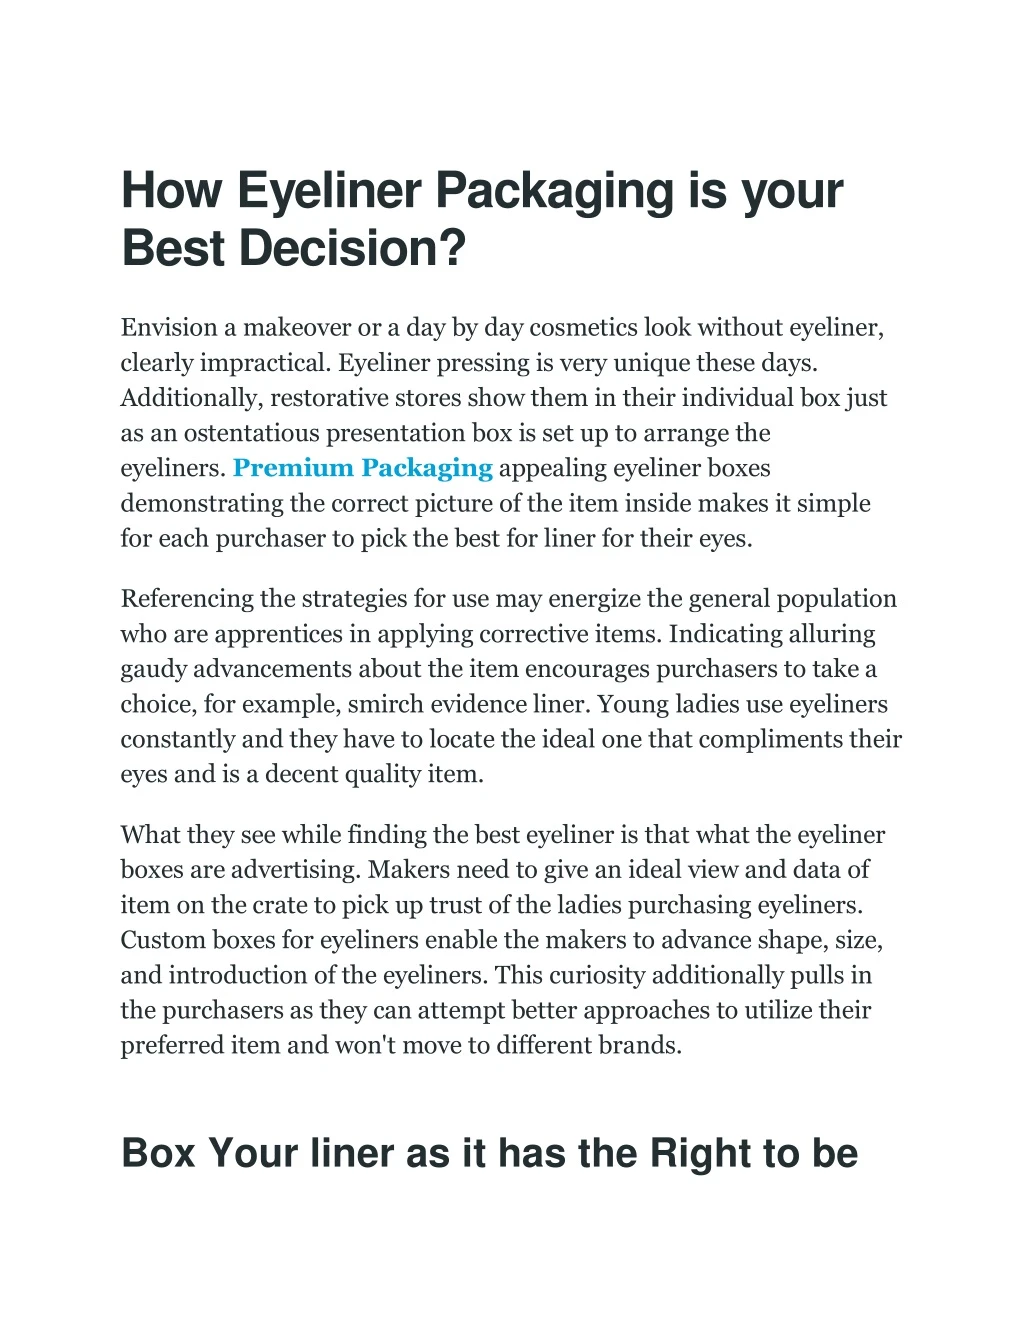 how eyeliner packaging is your best decision